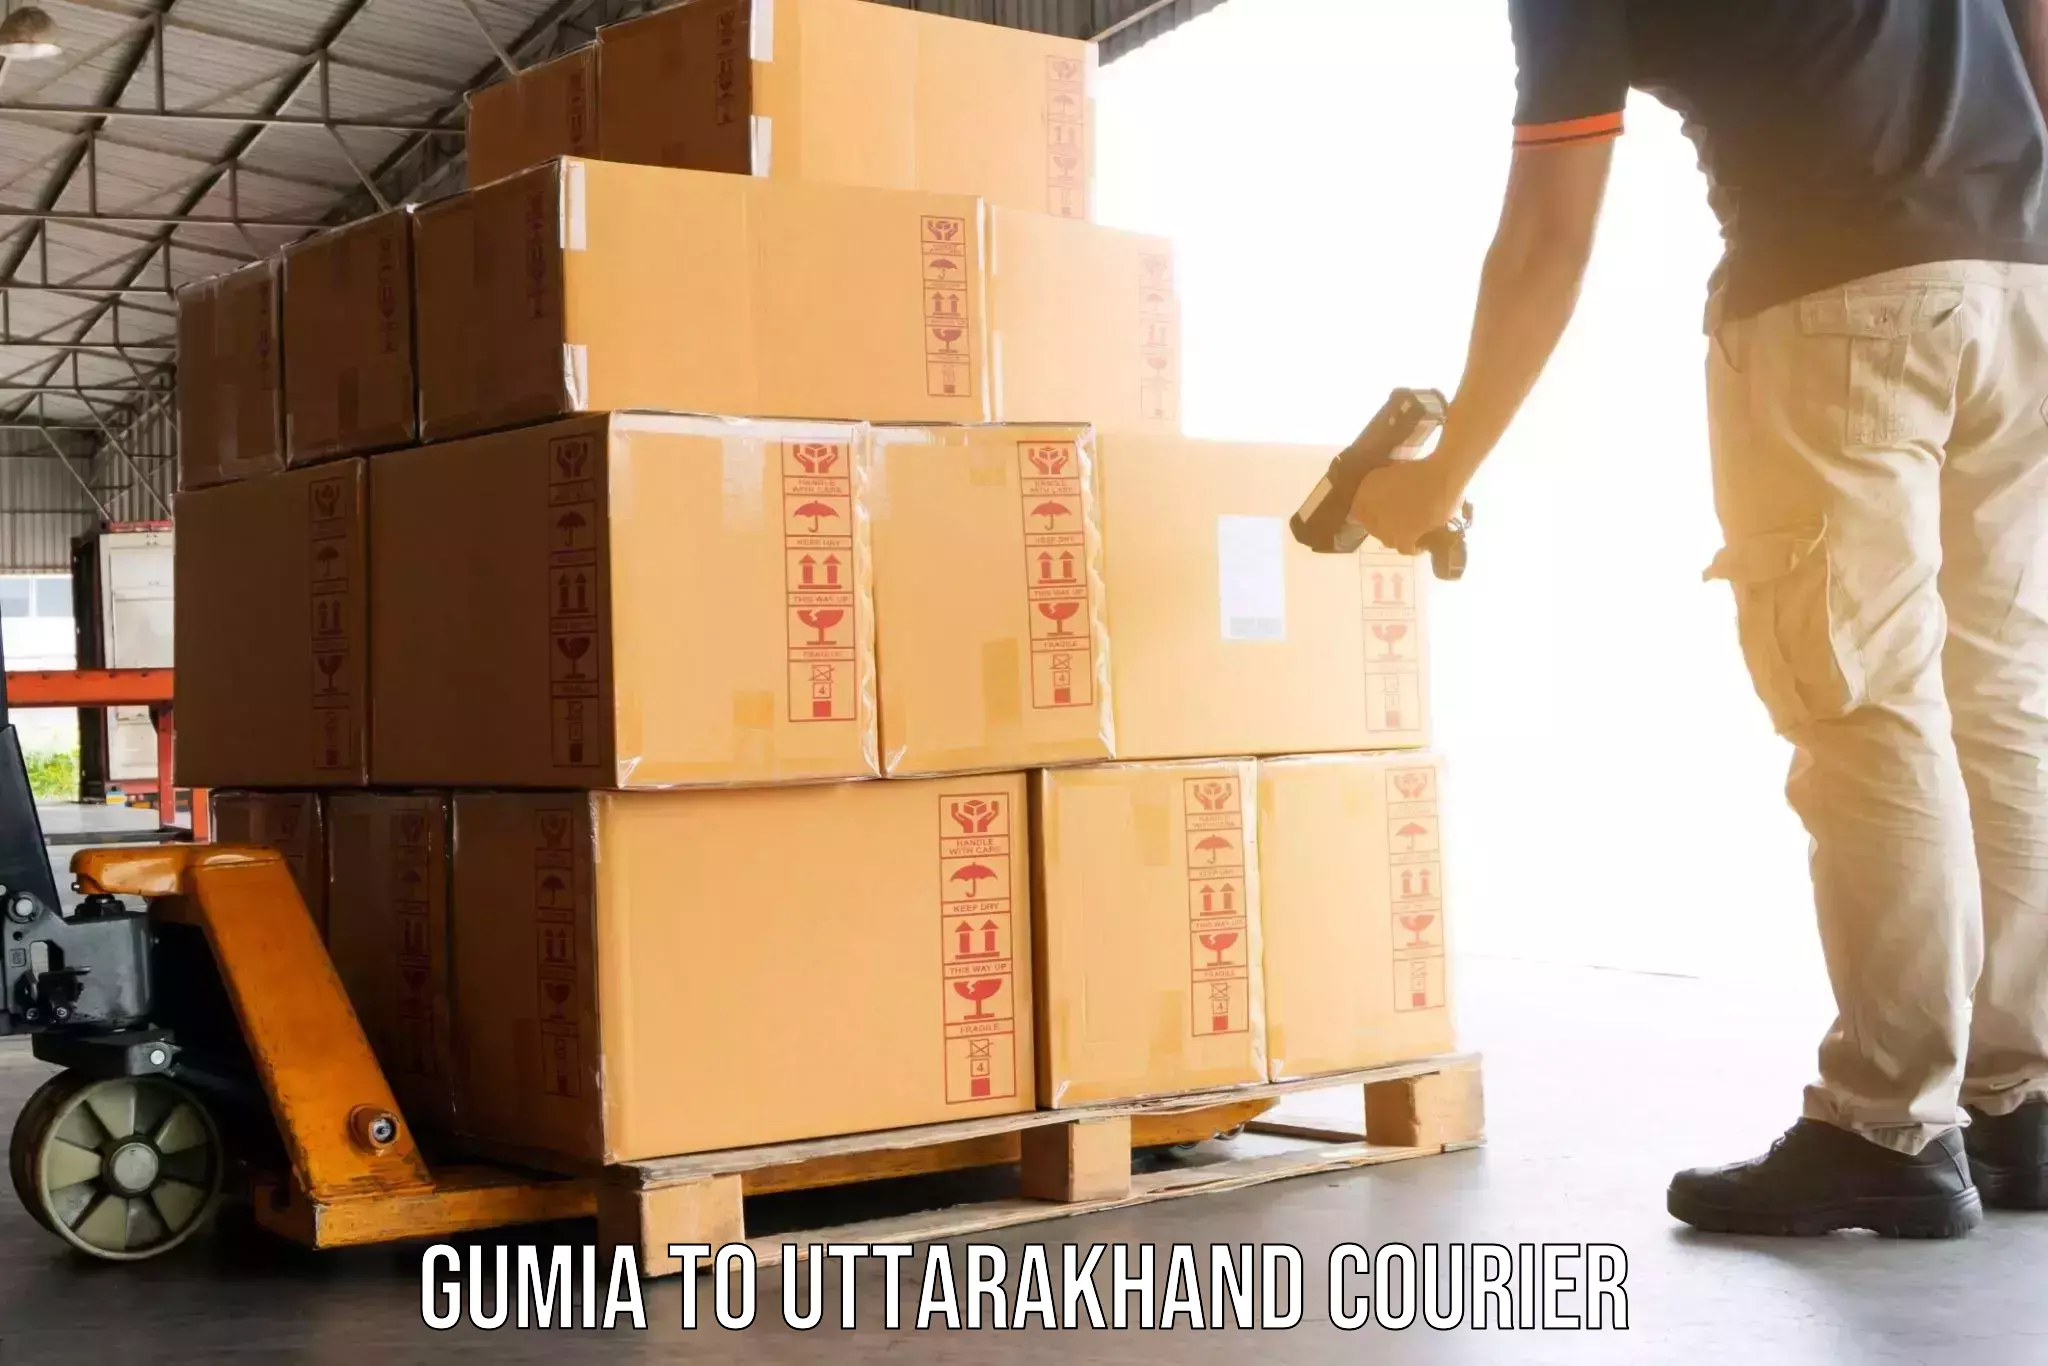 Trusted furniture transport in Gumia to Uttarakhand